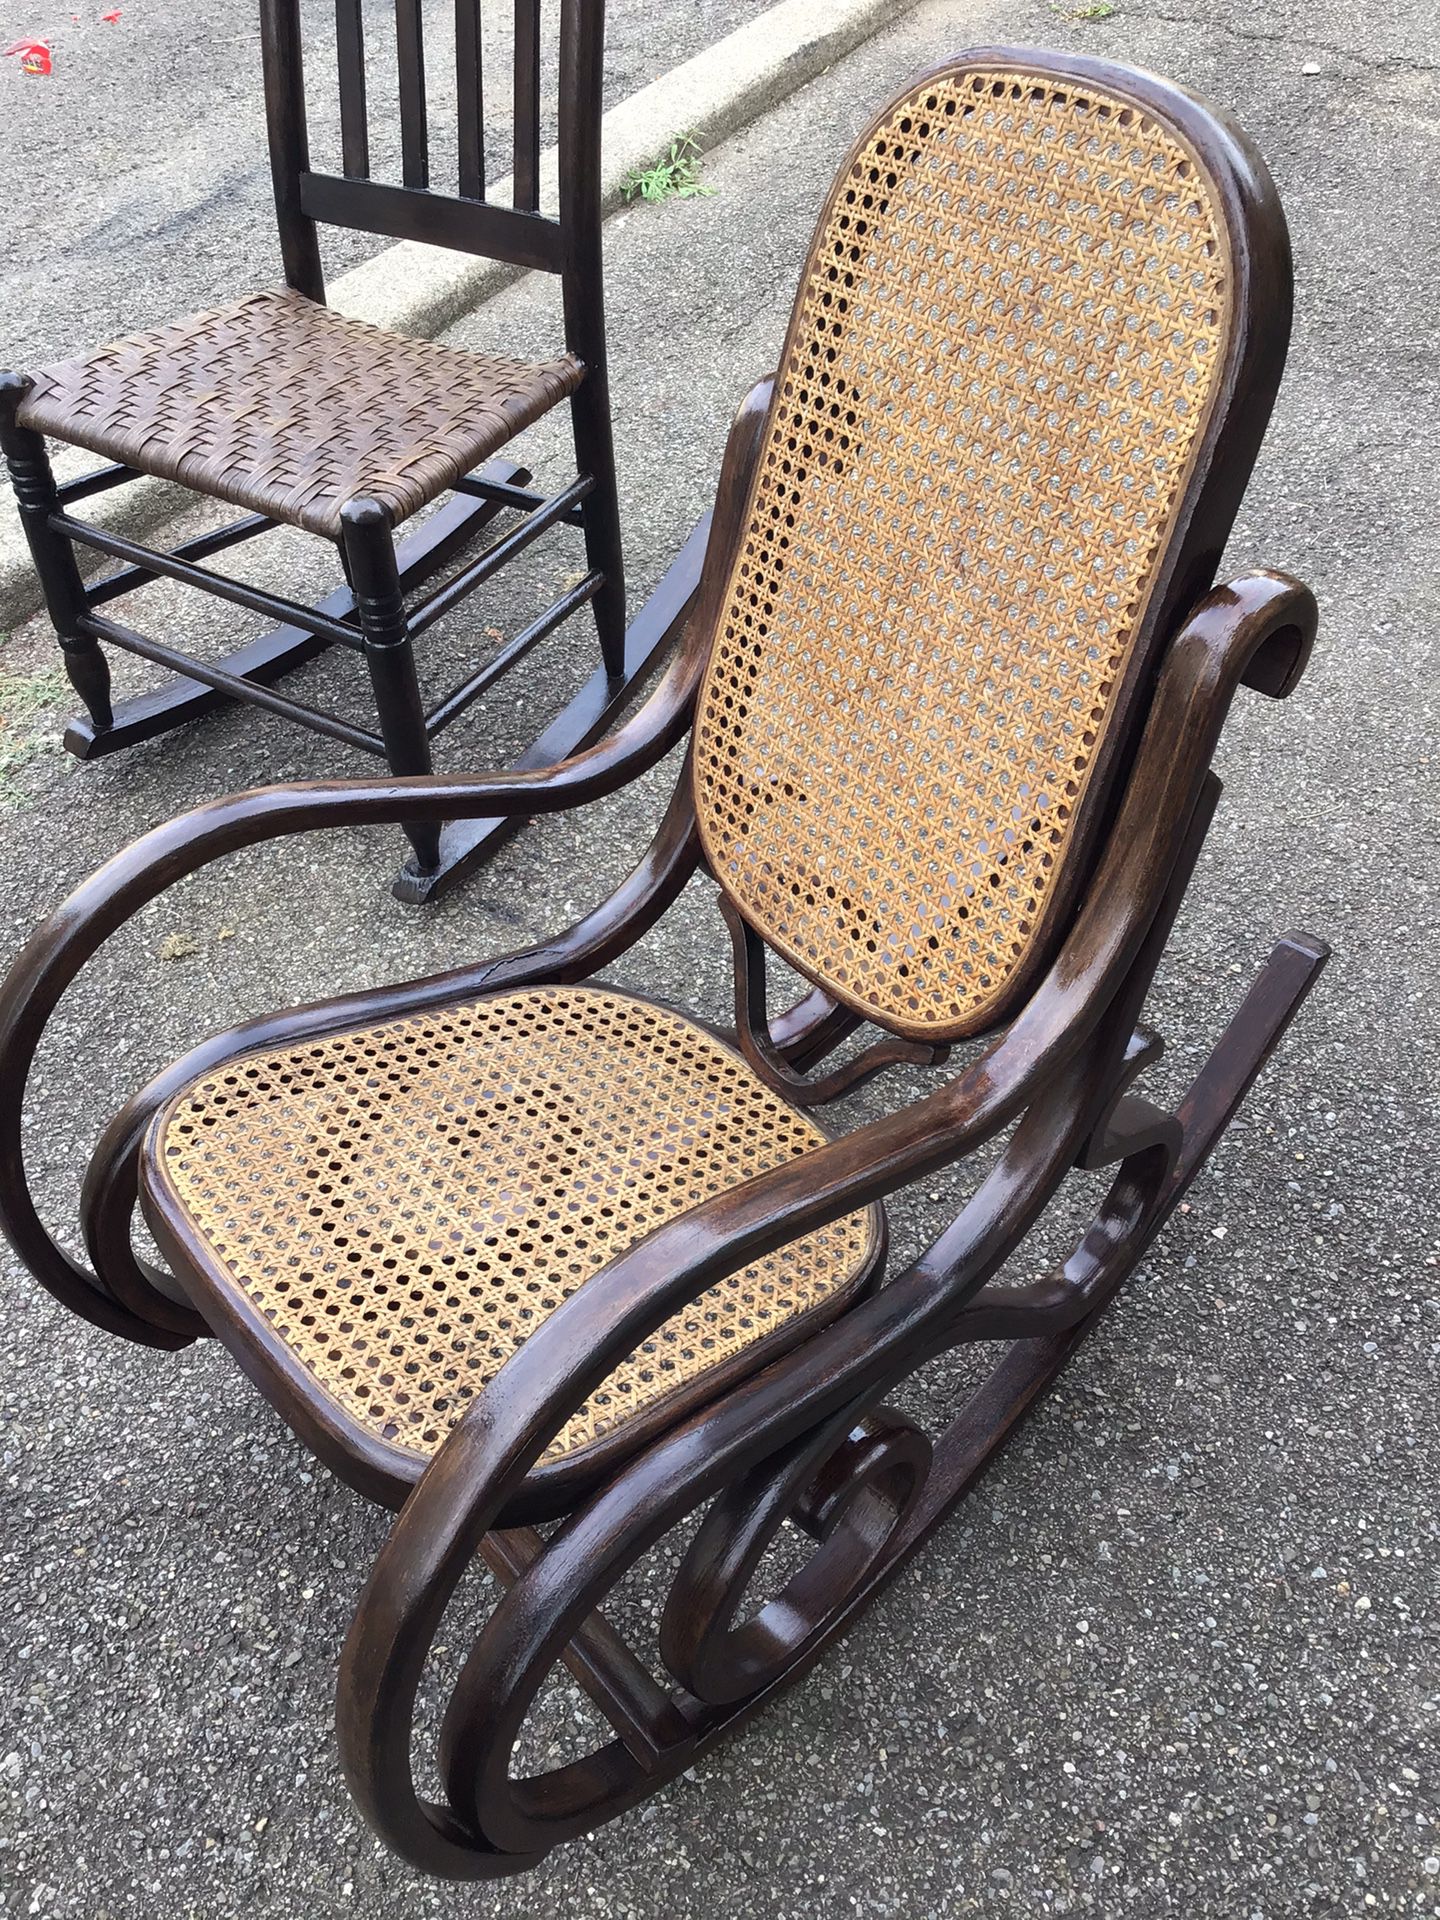 Small child’s rocking chairs